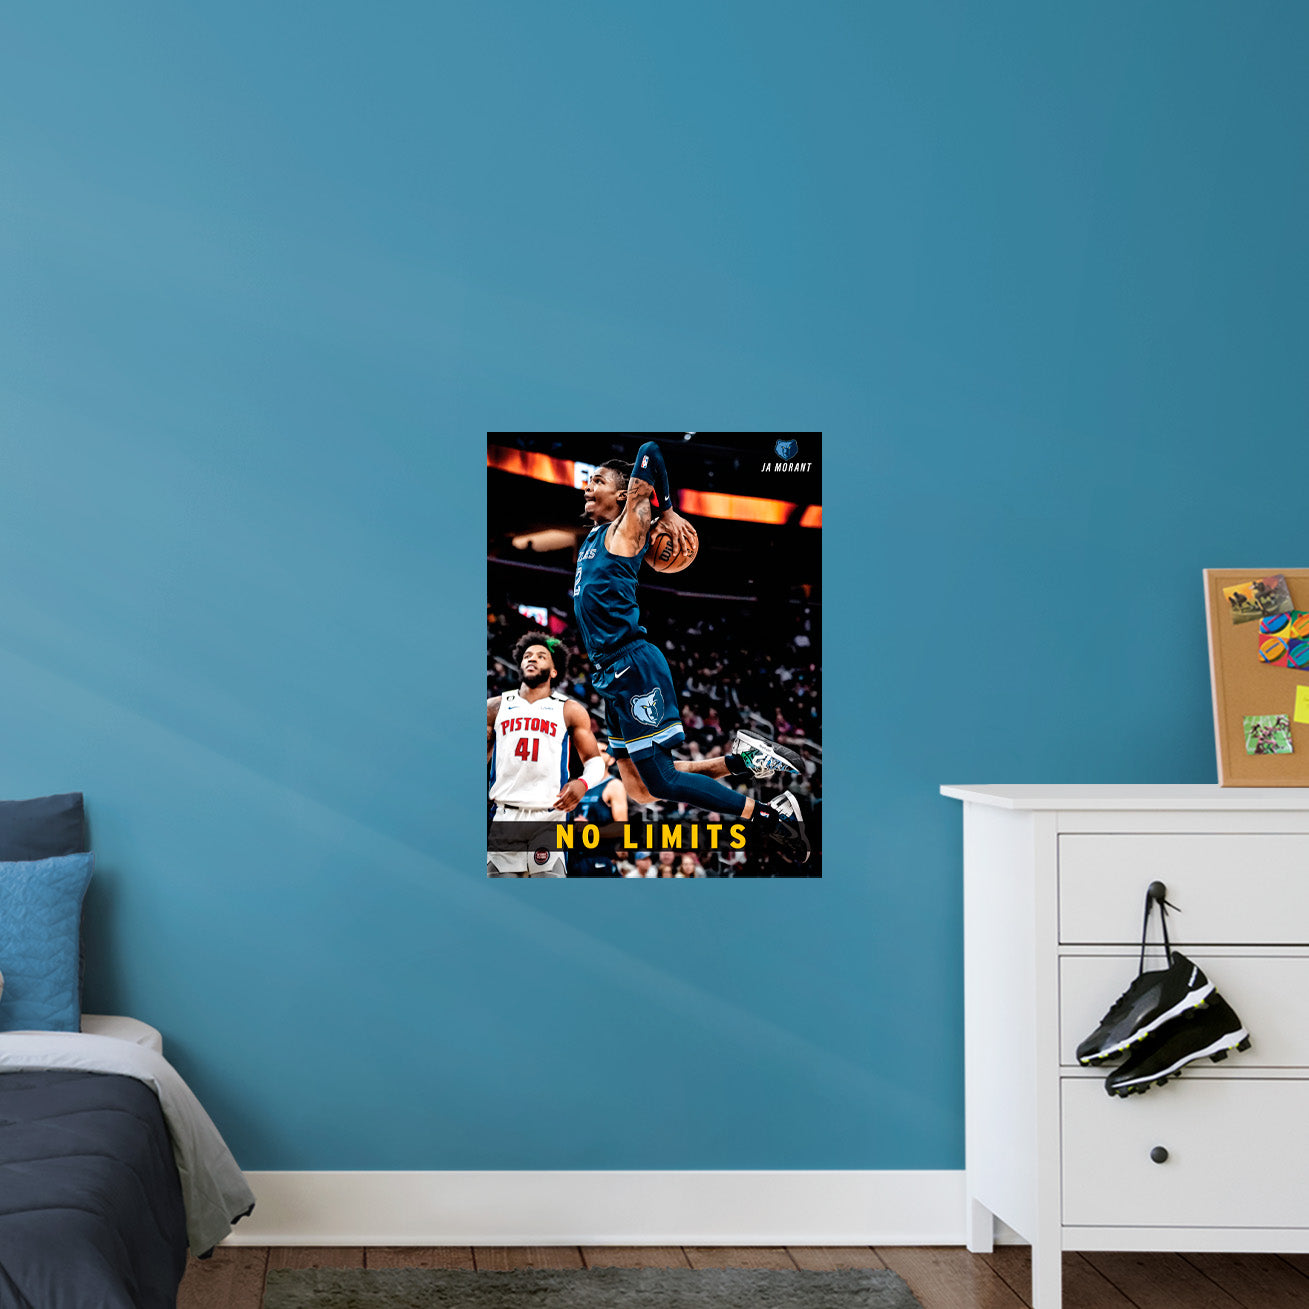 Memphis Grizzlies: Ja Morant Dunk Motivational Poster - Officially Licensed NBA Removable Adhesive Decal